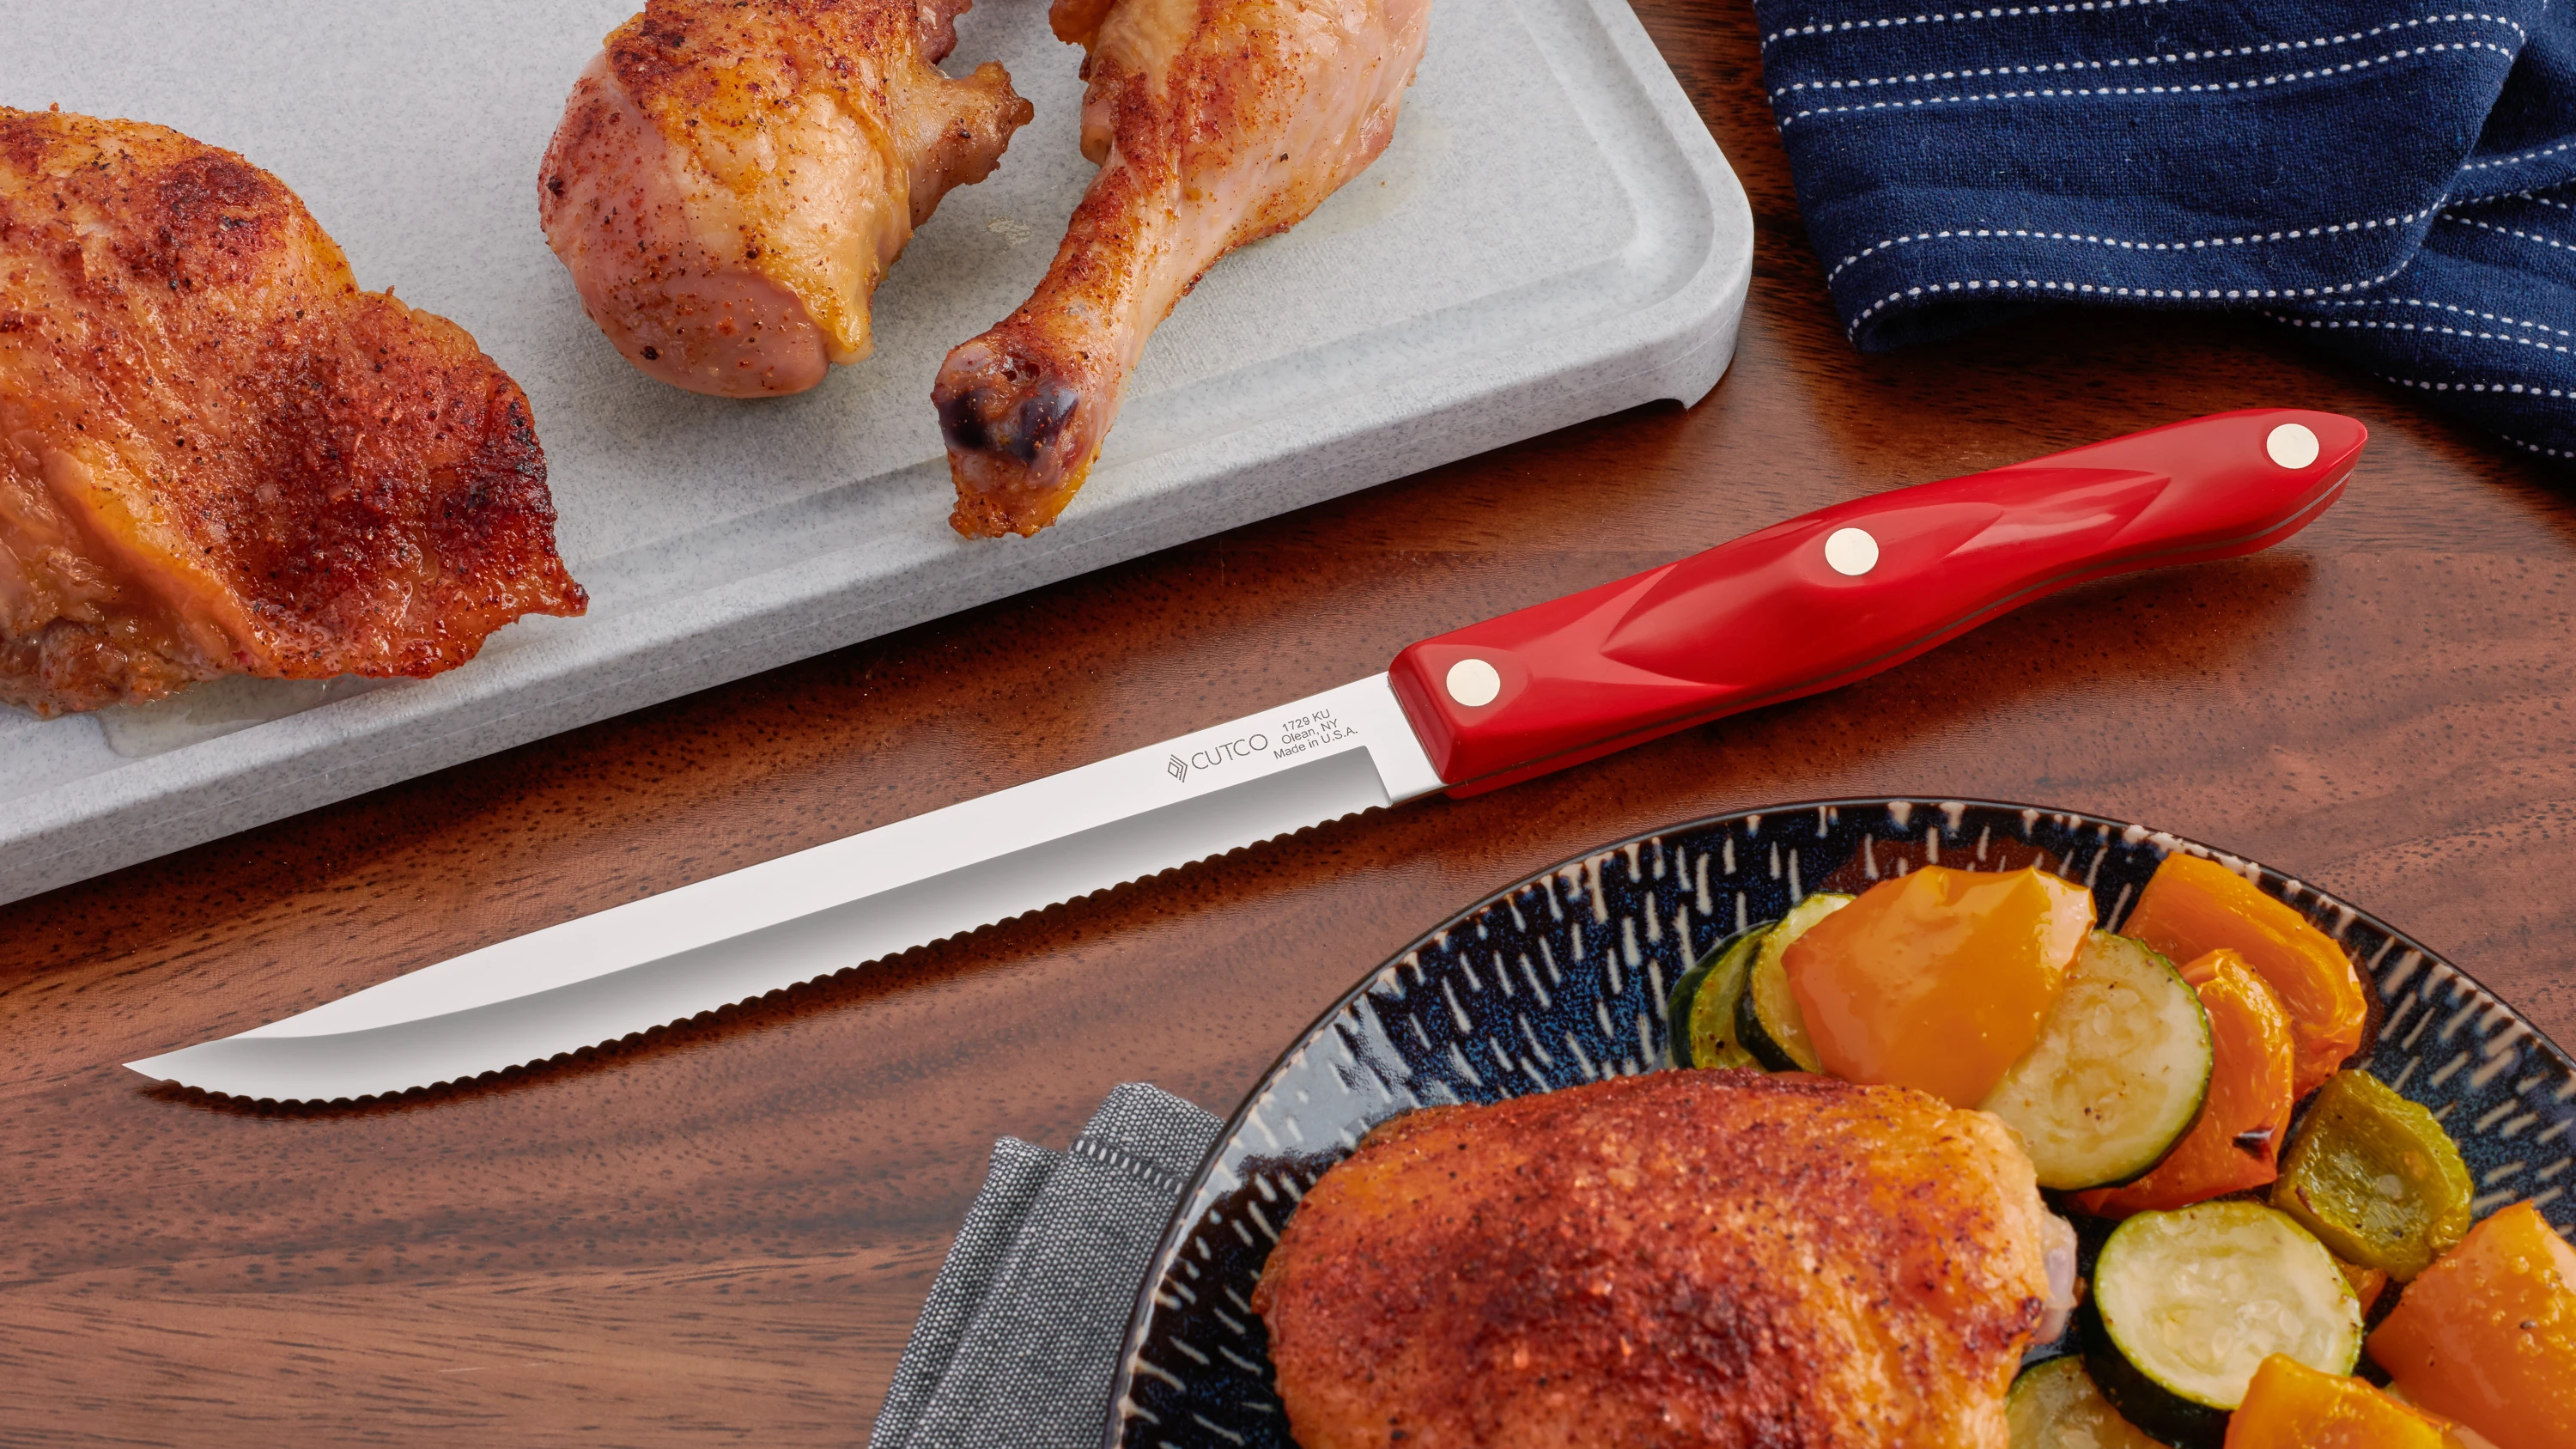 Cutco Petite Chef Knife Review: A sharp knife that's comfortable